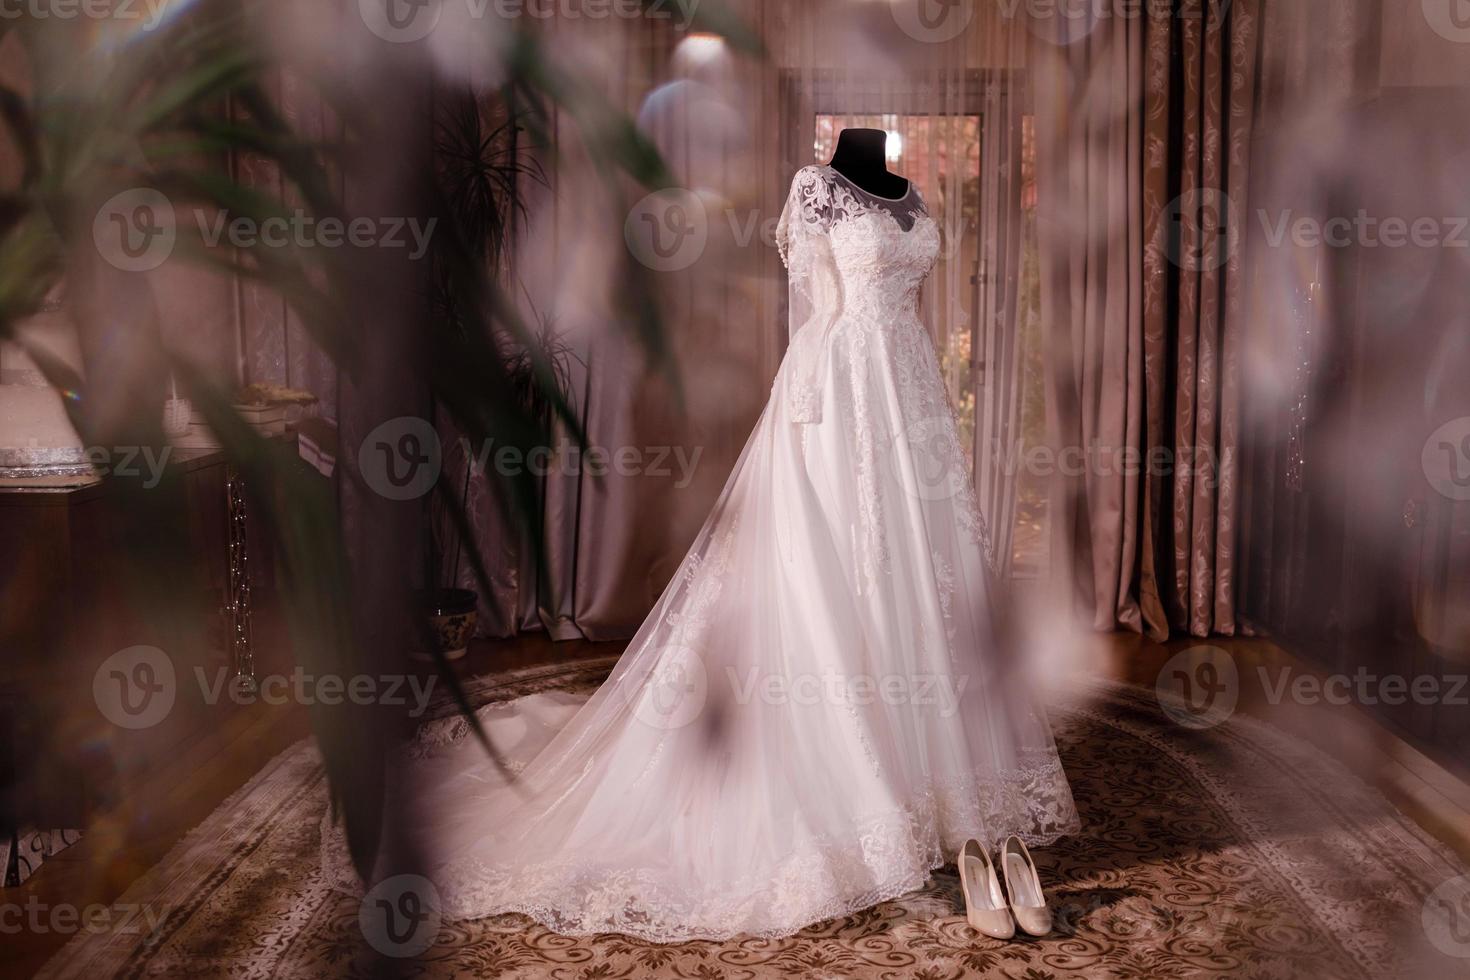 stylish and beautiful wedding dress. classic lace silk wedding dress hanging on hanger in hotel wooden room. morning preparation wedding concept. photo